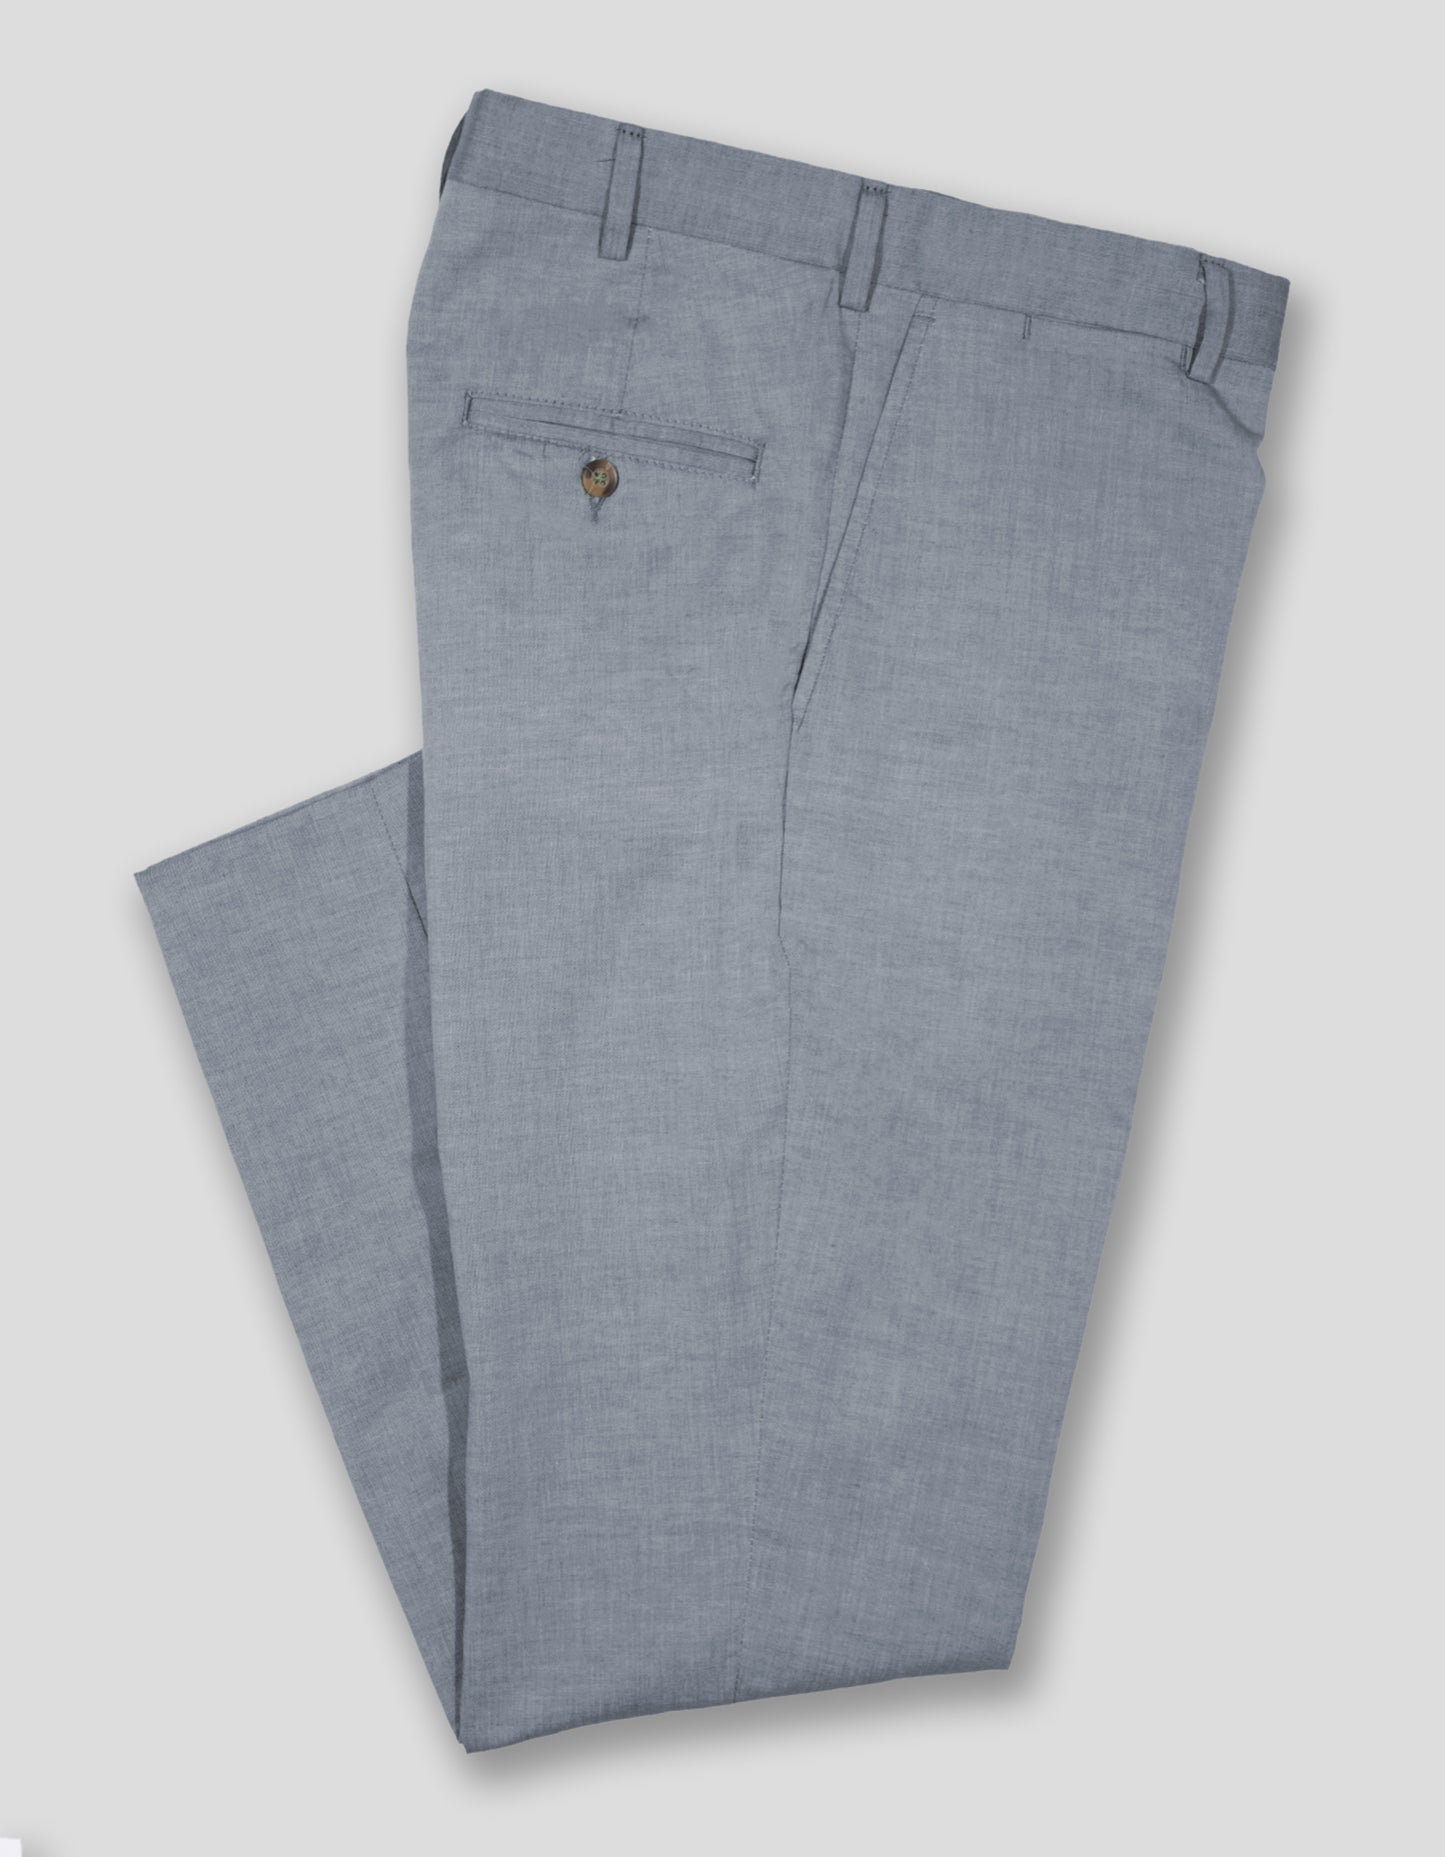 CHARCOAL CHAMBRAY PANTS - CLASSIC FIT